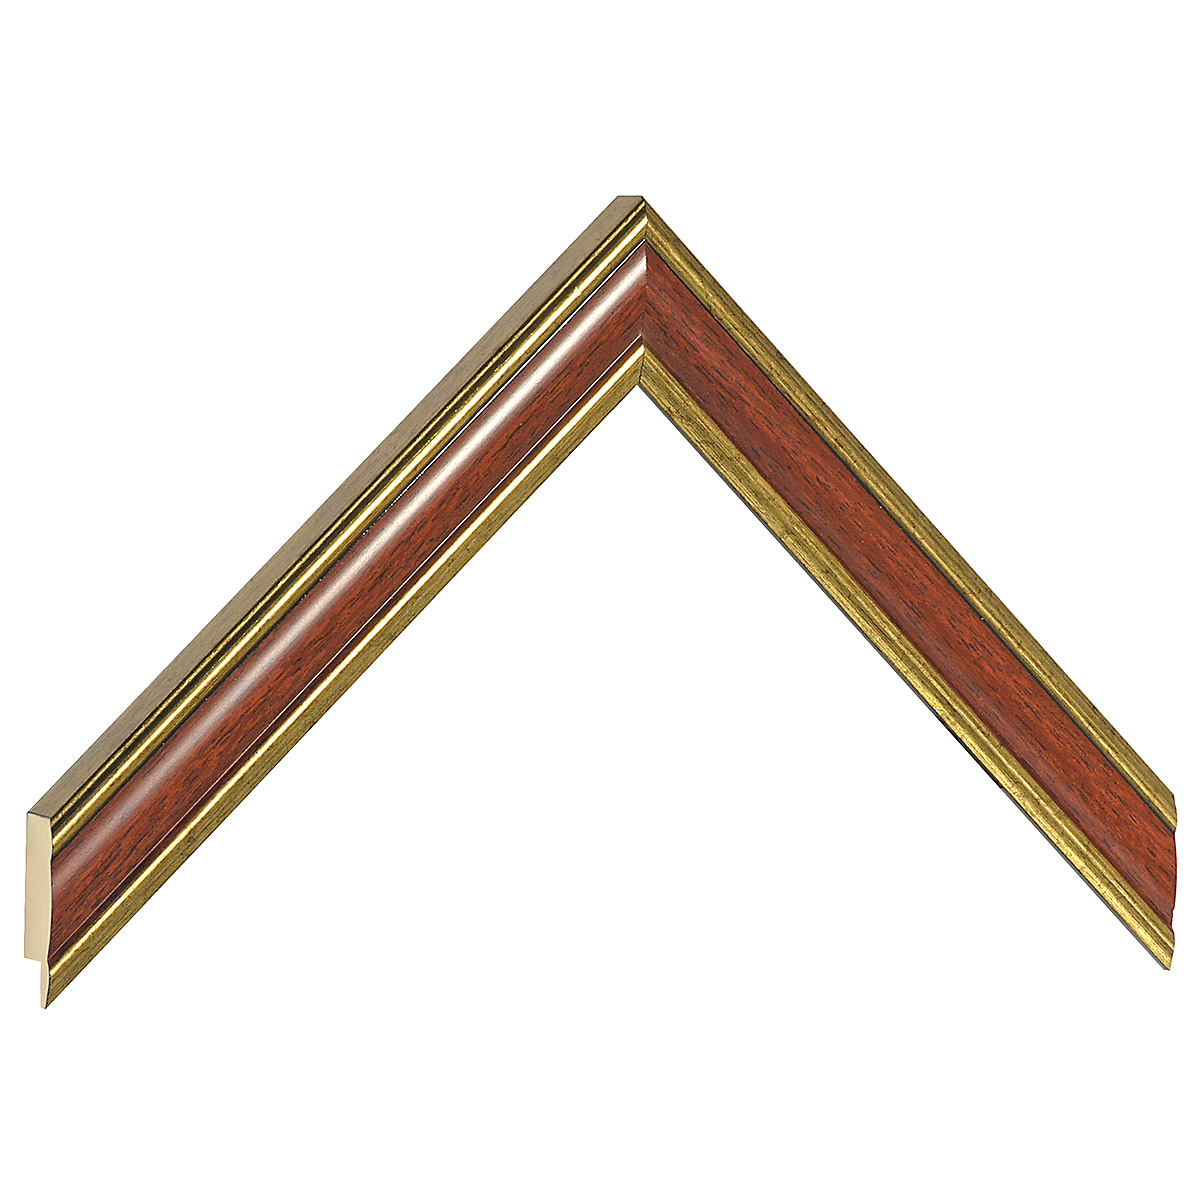 Moulding ayous jointed width 24mm - Gold with mahogany band - Sample